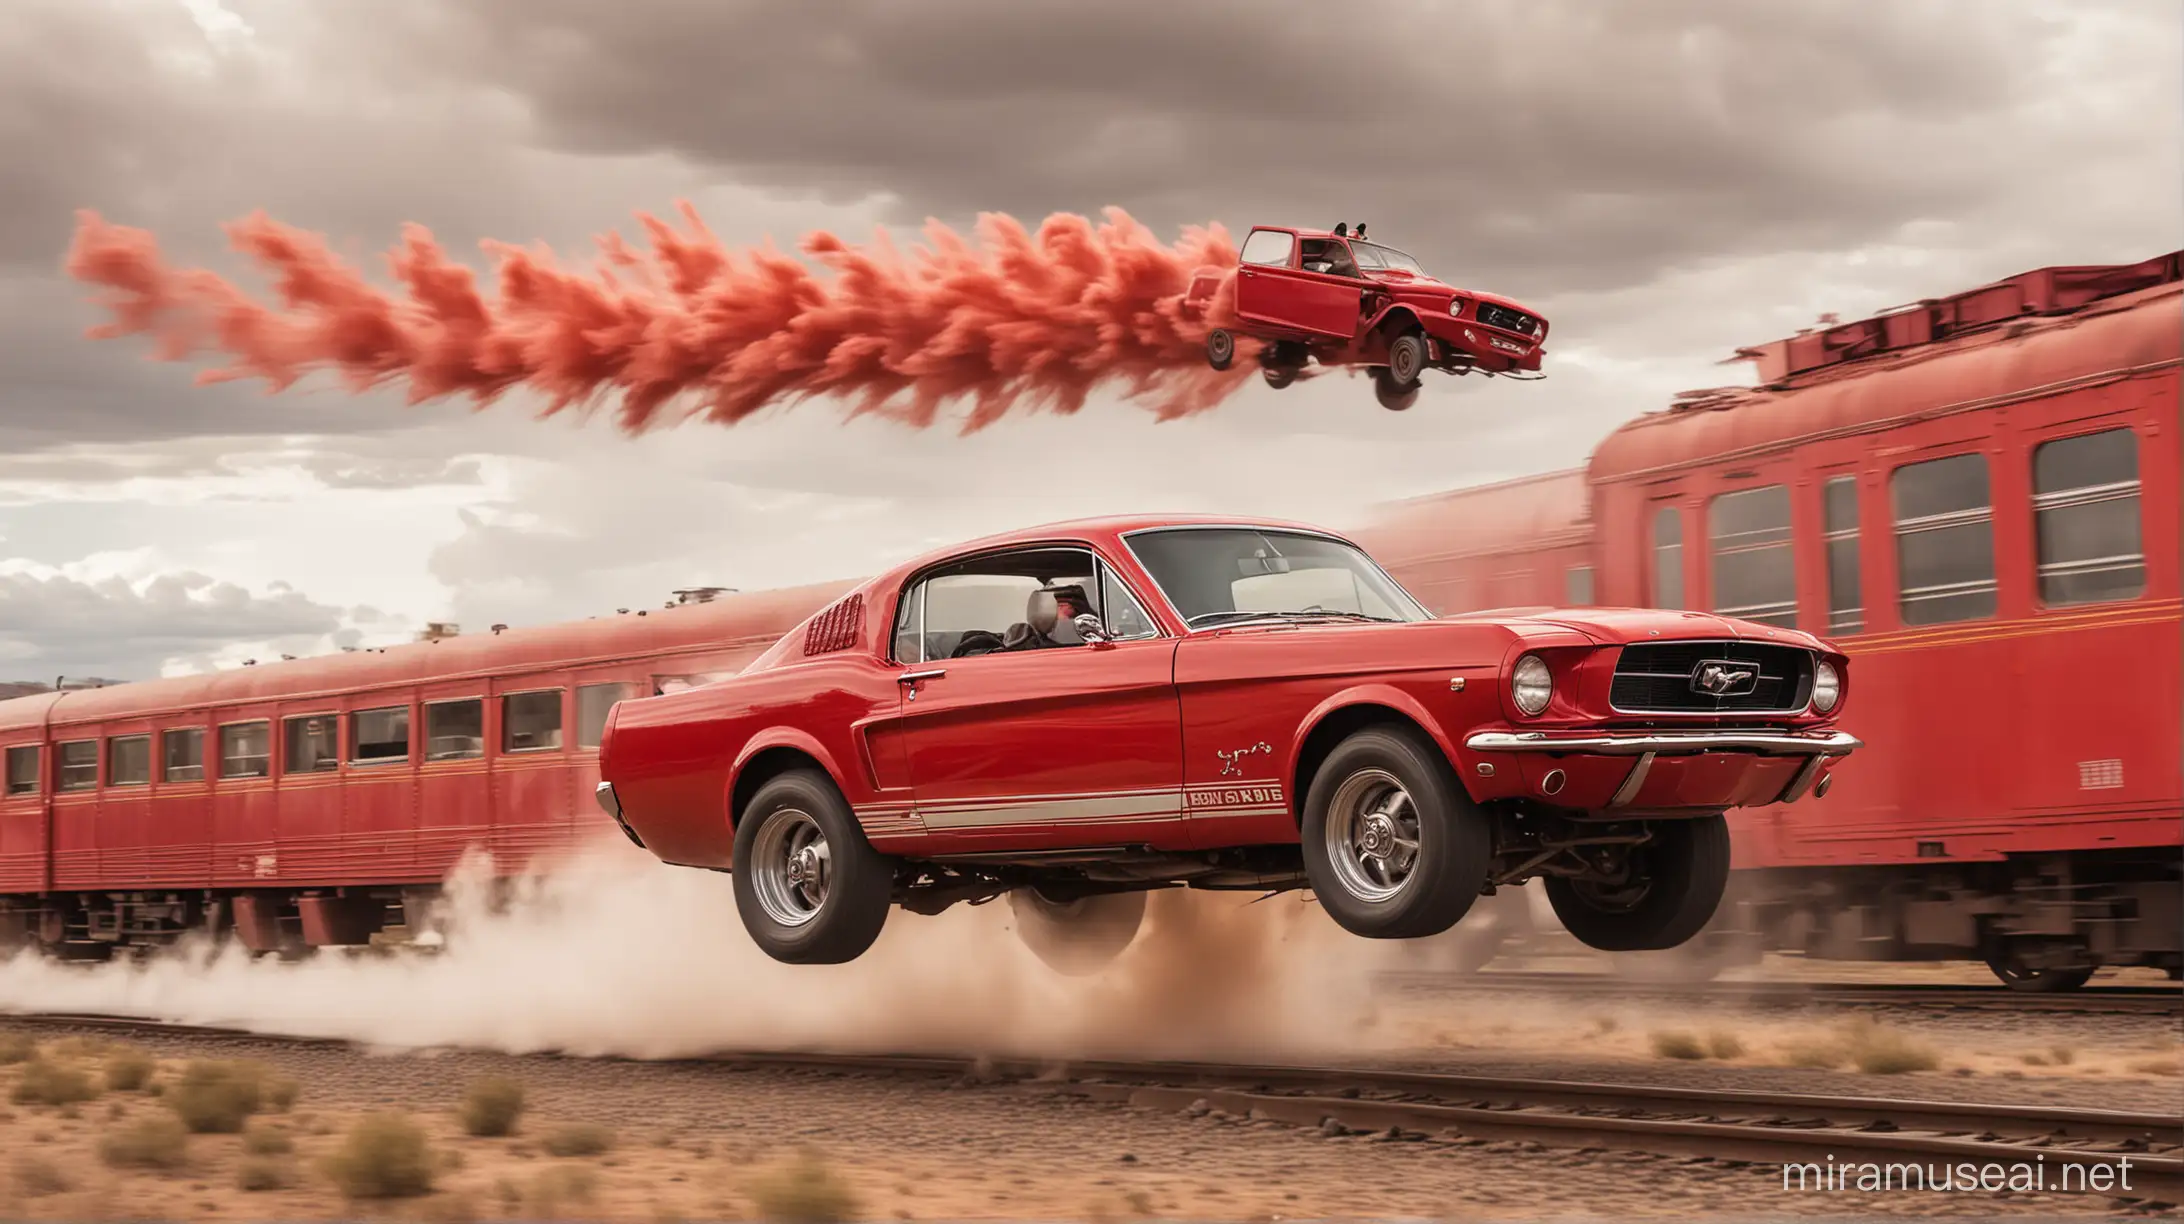 "Generate an image of an old red Mustang leaping through the air in front of a speeding red train, capturing the exhilarating moment of motion and power."